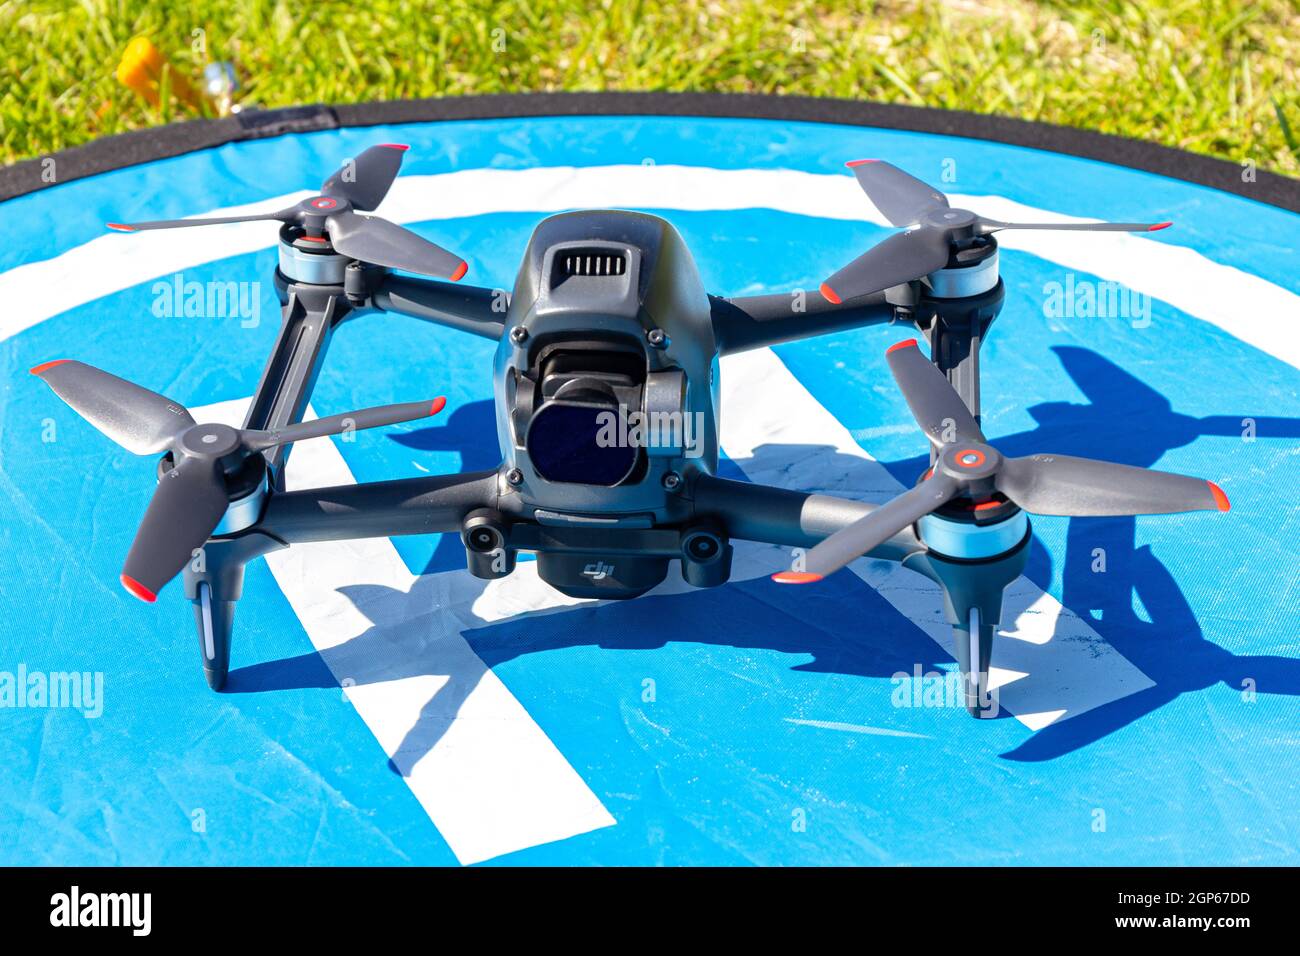 Moscow Russia - 30 may 2021: Close-up picture new aerial DJI FPV drone on fly landing pad. Top front view uav quad copter with 4K 60 fps Digital Camer Stock Photo